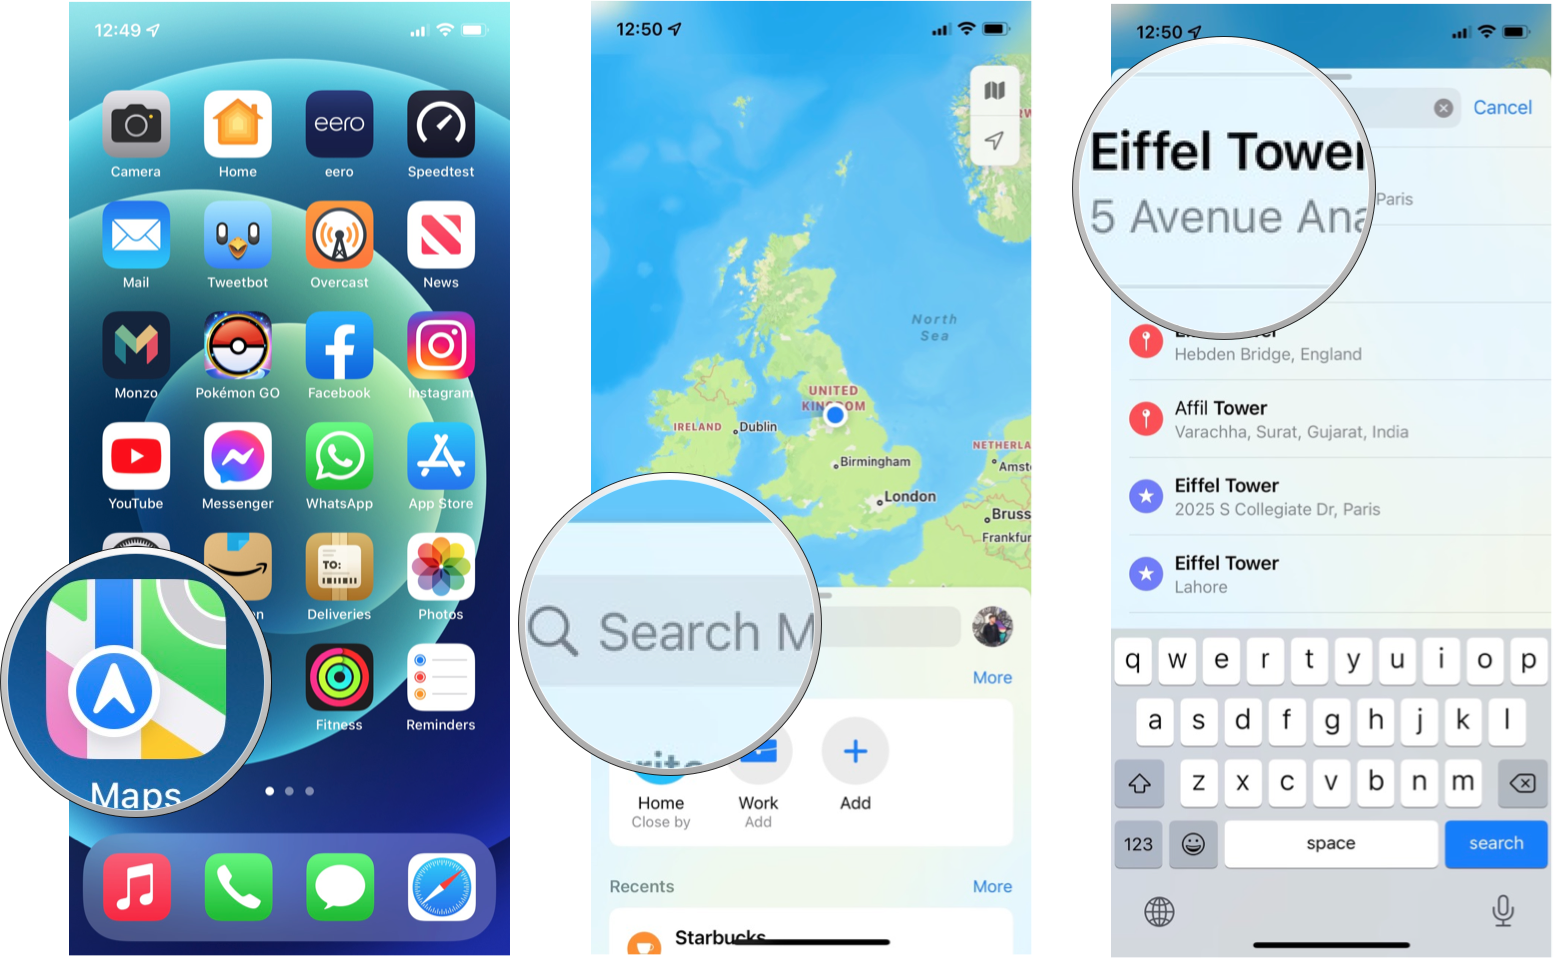 How to use Flyover: Open Maps, tap the search field and type the location you want to see, tap the correct result in the search results list.